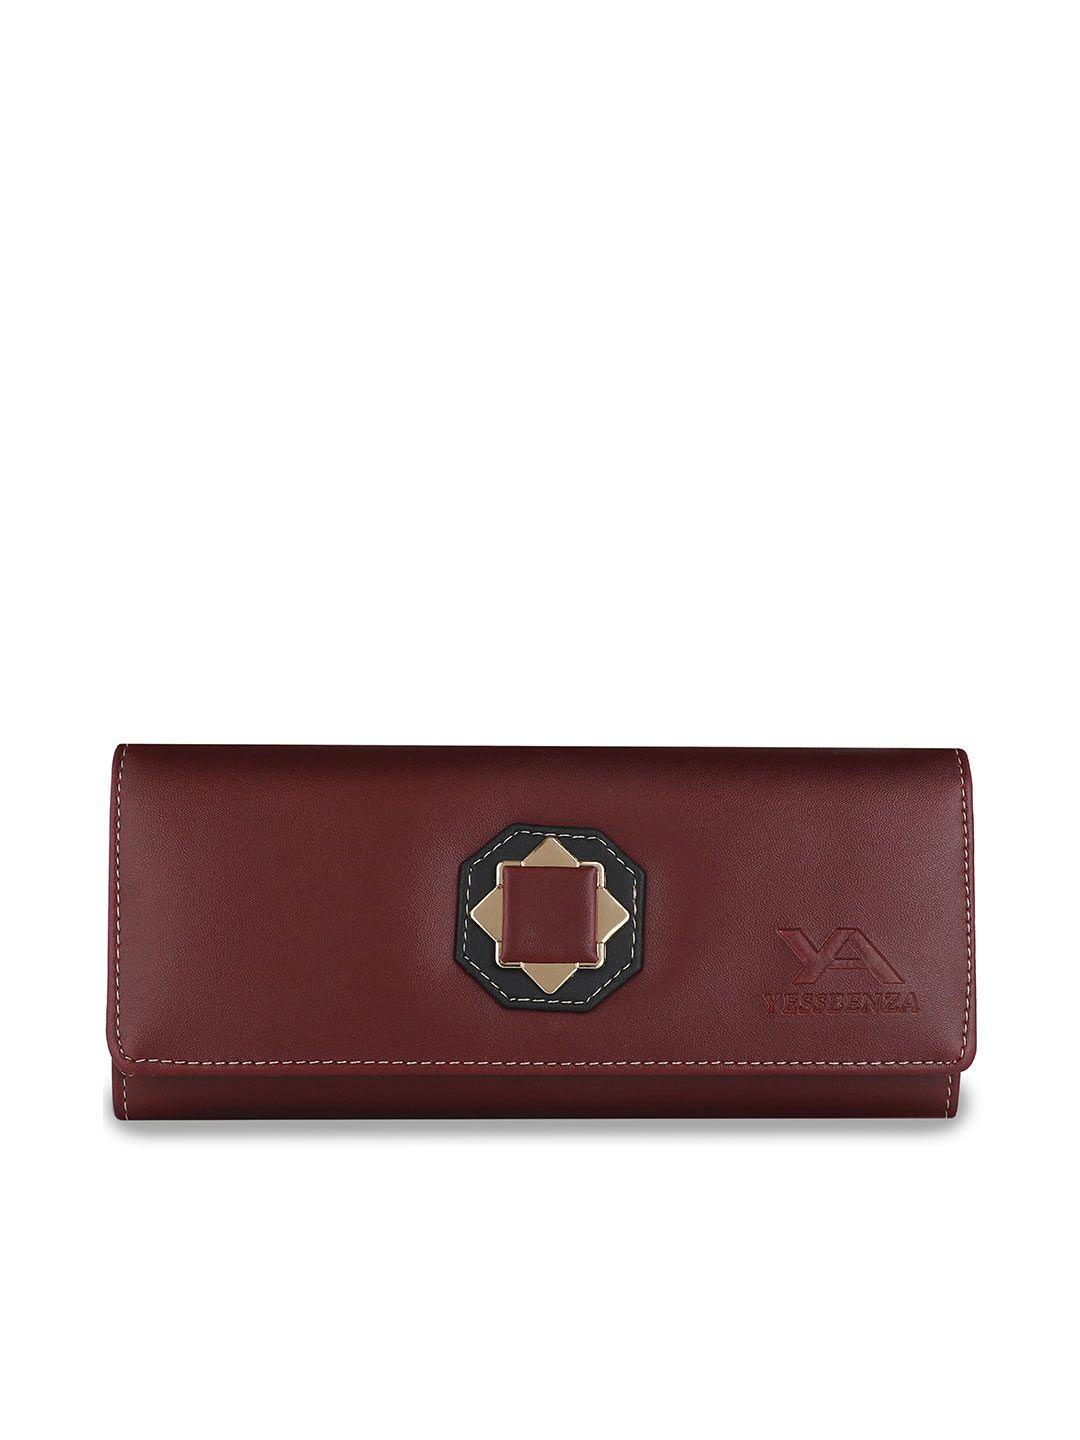 yessbenza maroon bow detail envelope clutch